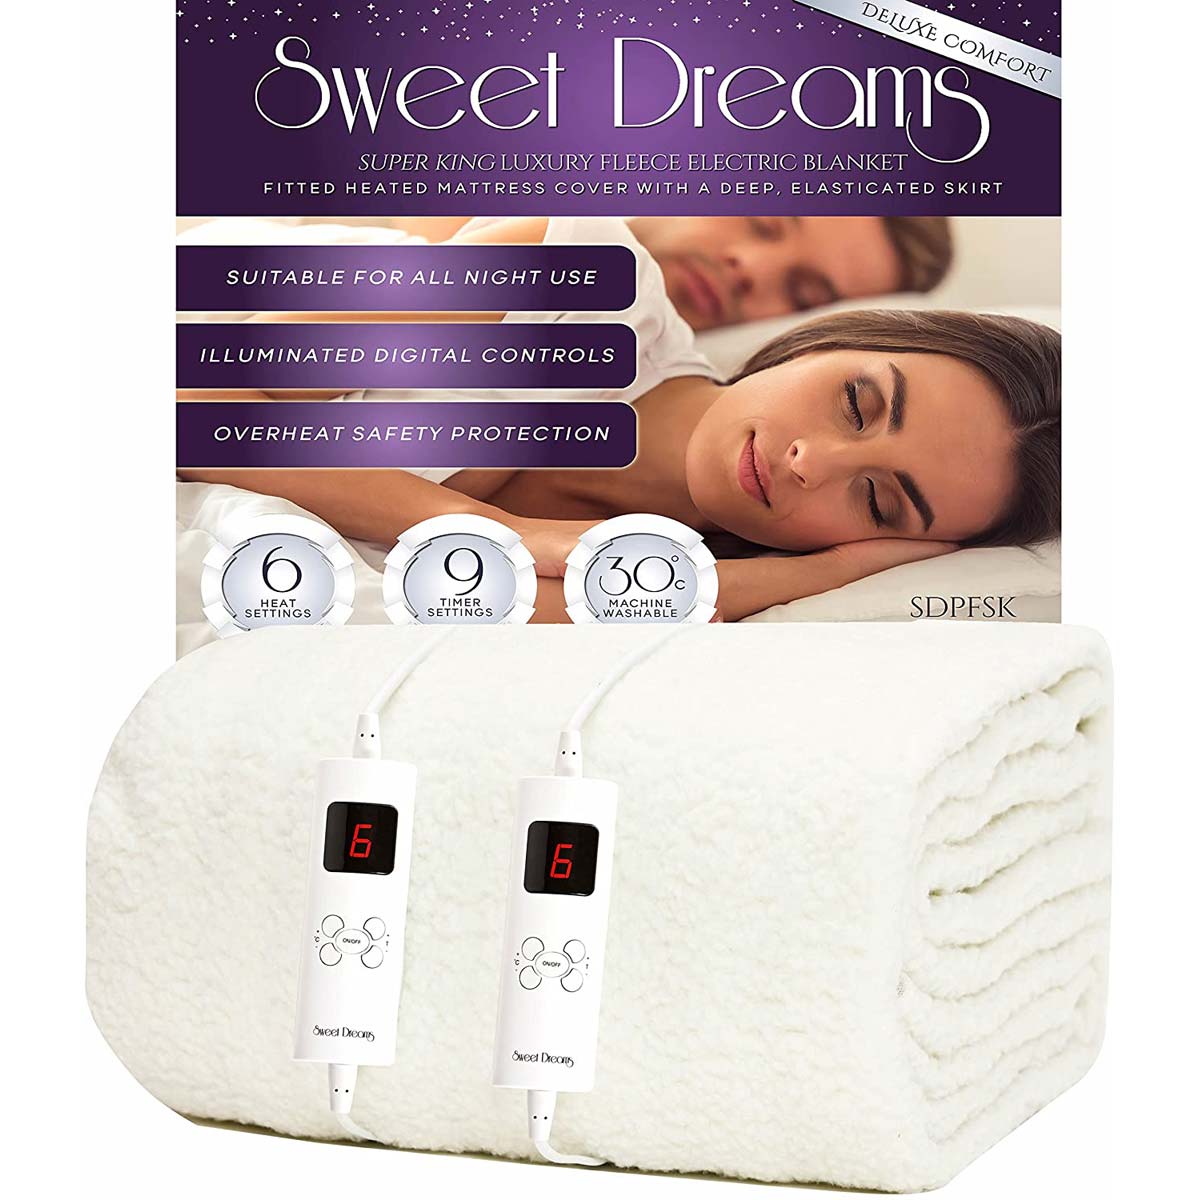 Sweet Dreams Electric Blanket Super King Size - Dual Controls - Luxury Bed Fleece Heated Mattress Cover